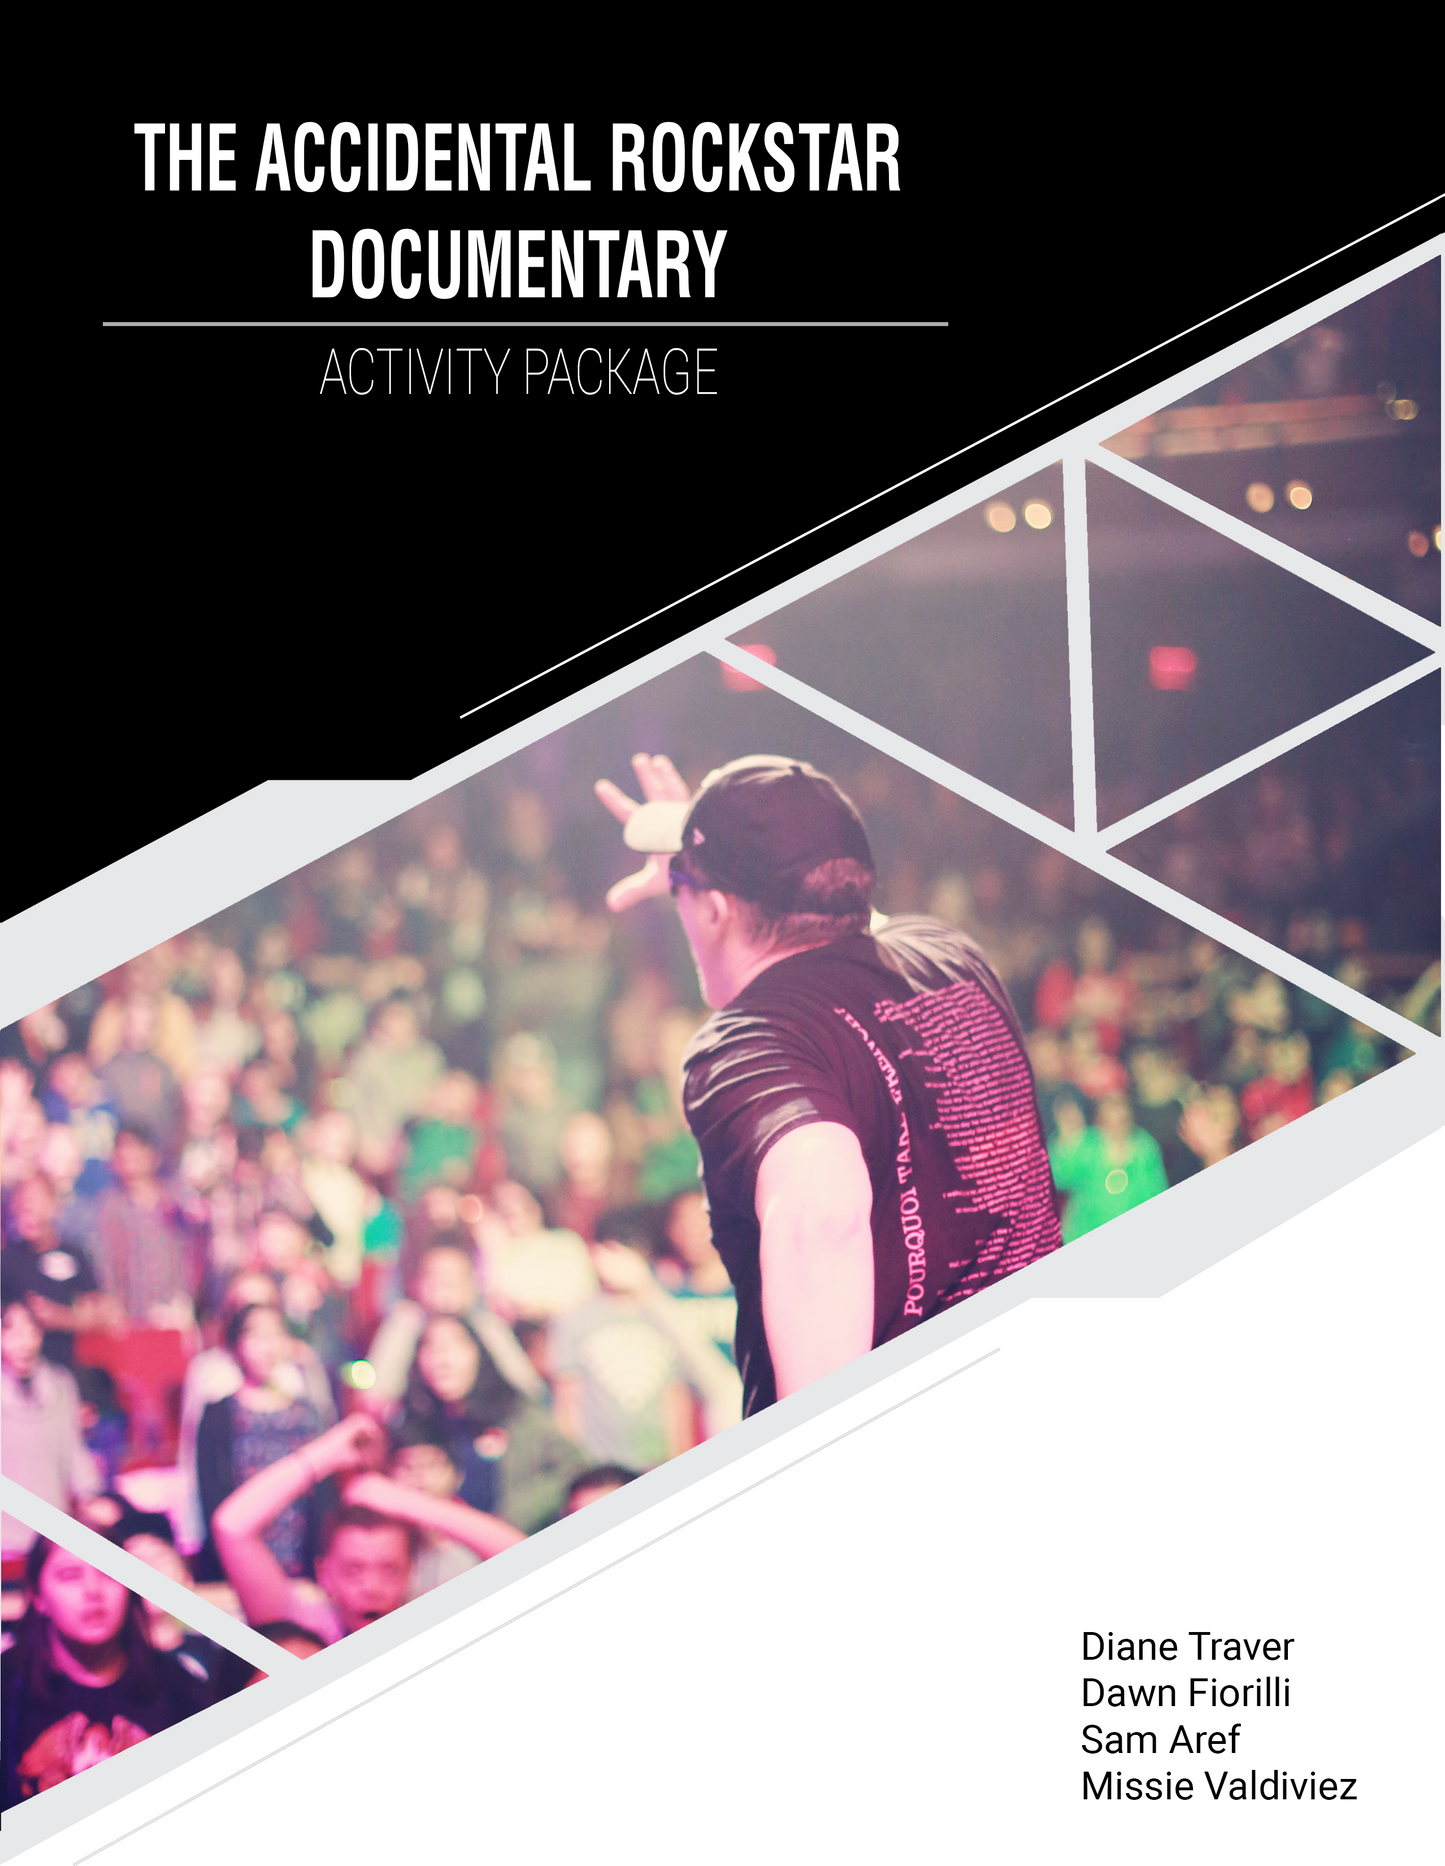 The Accidental Rockstar Documentary - Activity Package